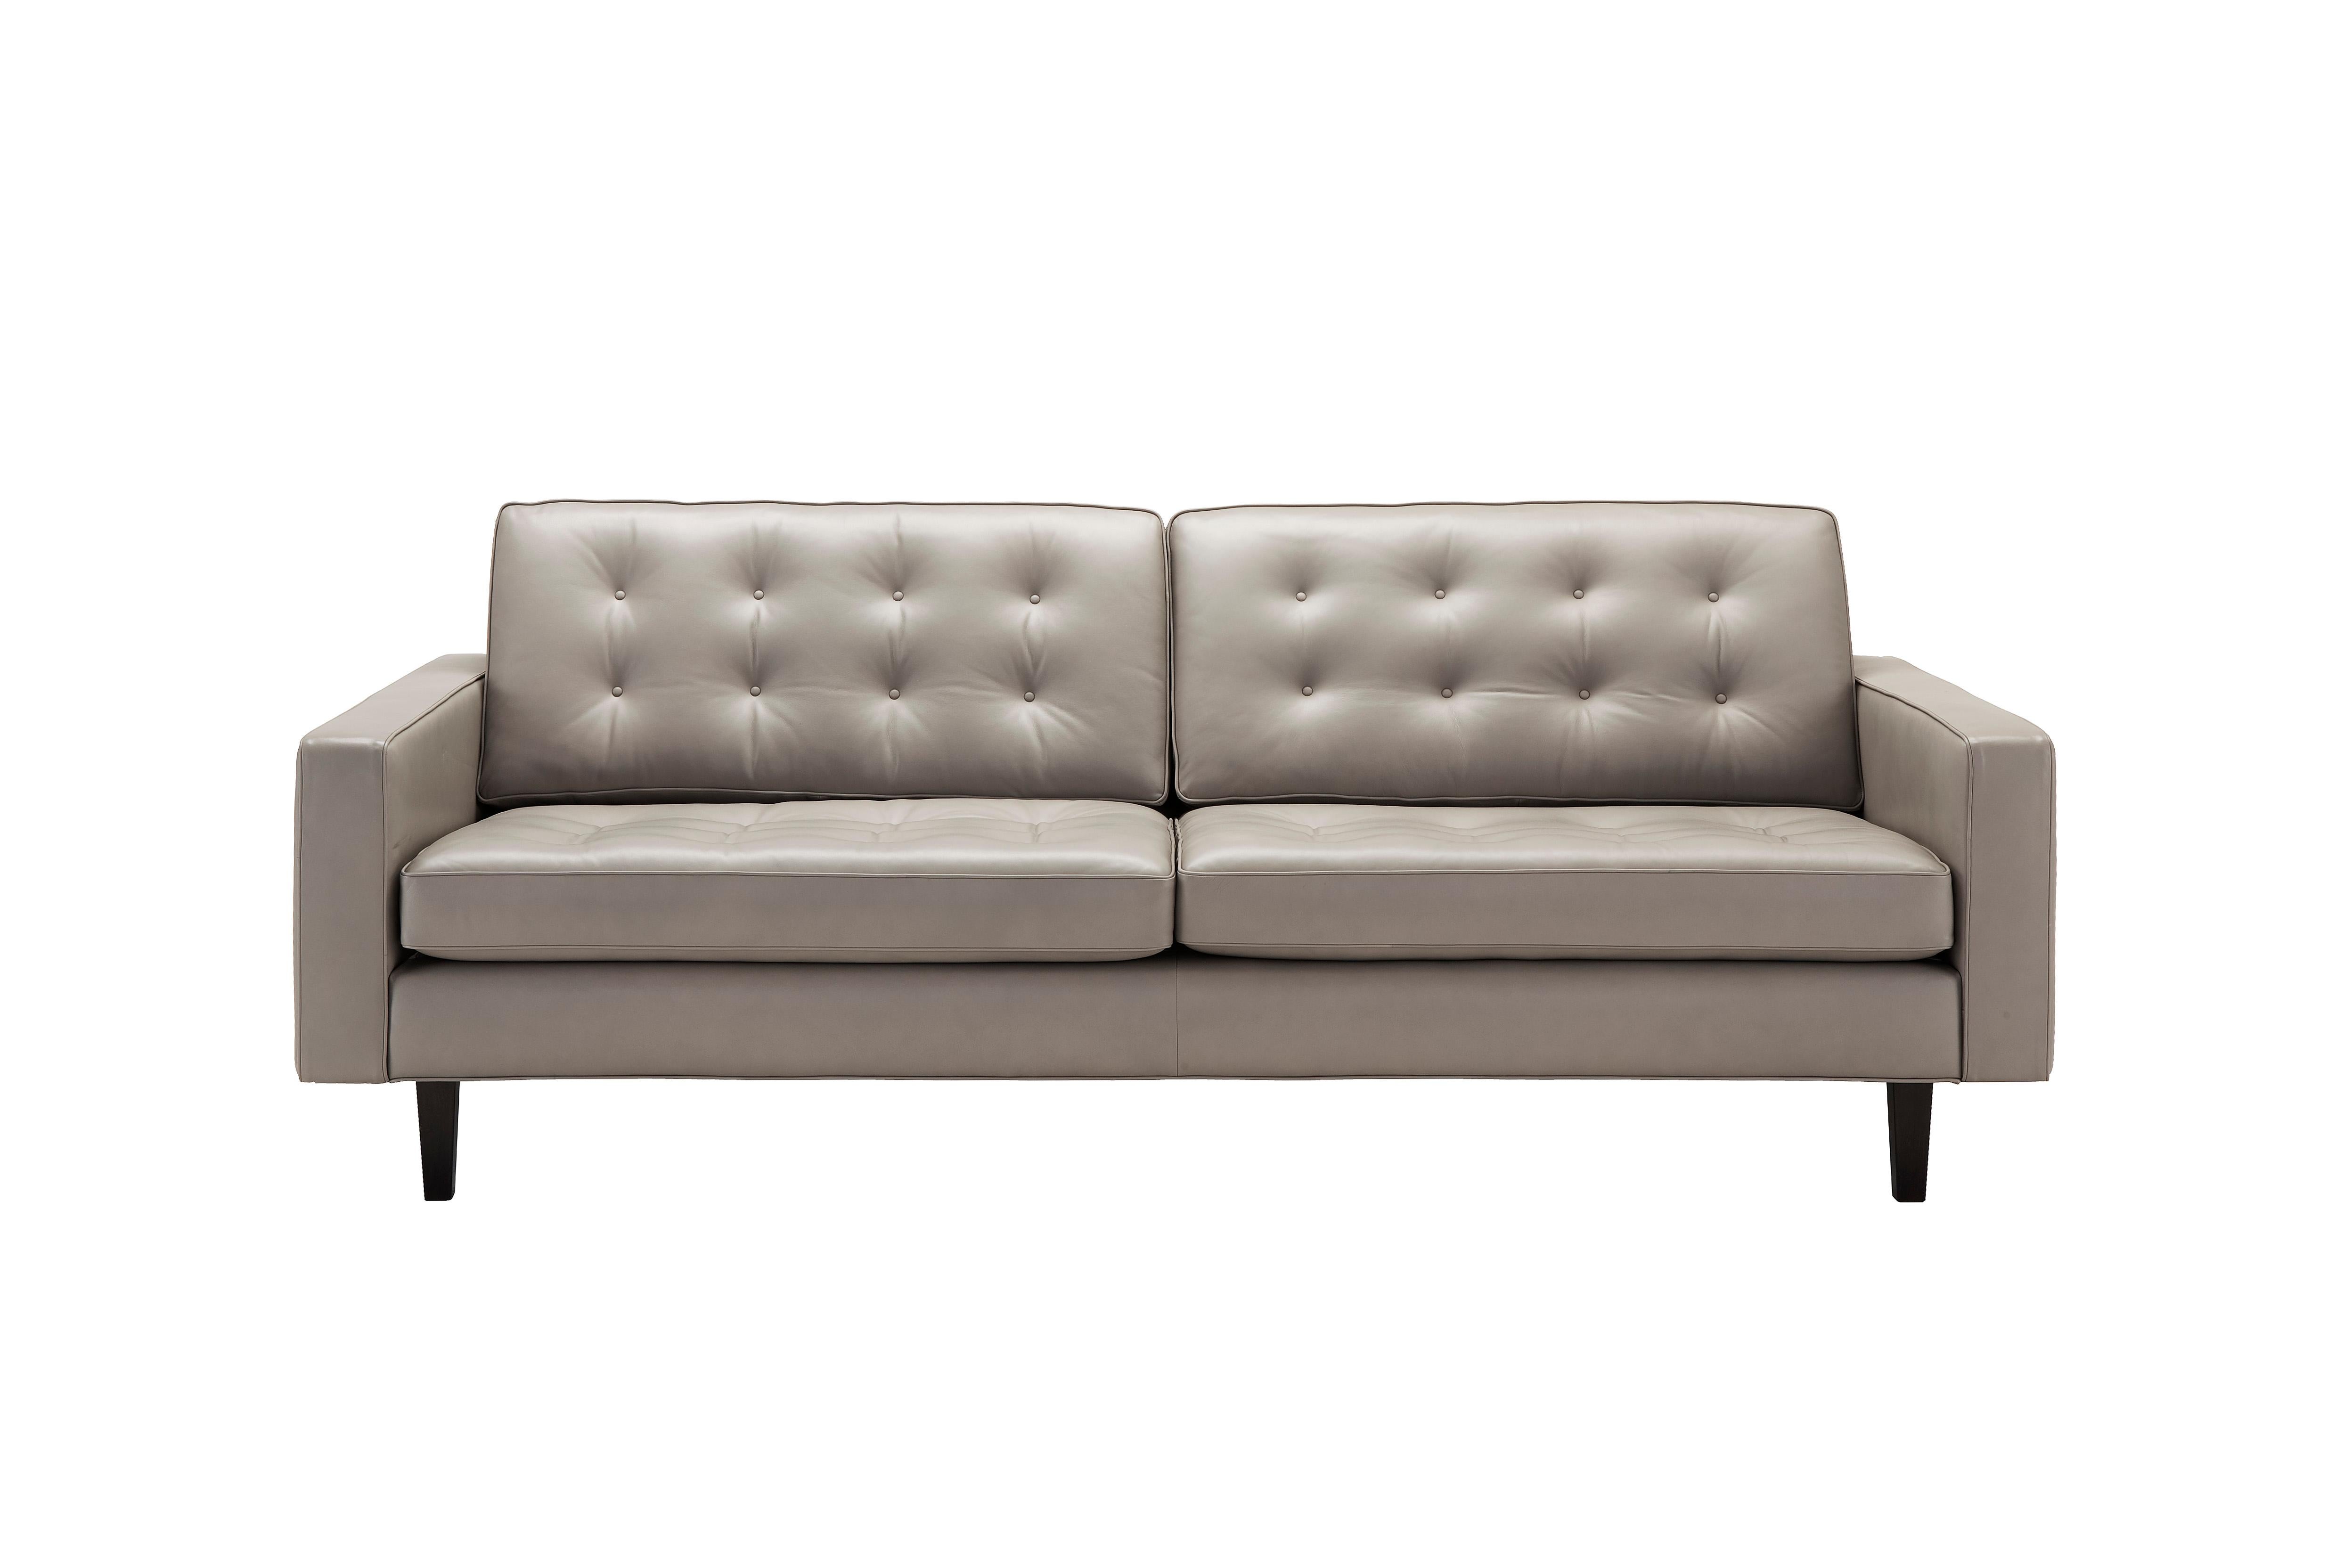 Amura 'Urano' Sofa in Pale Gray Leather by Amura 'Lab For Sale at 1stDibs